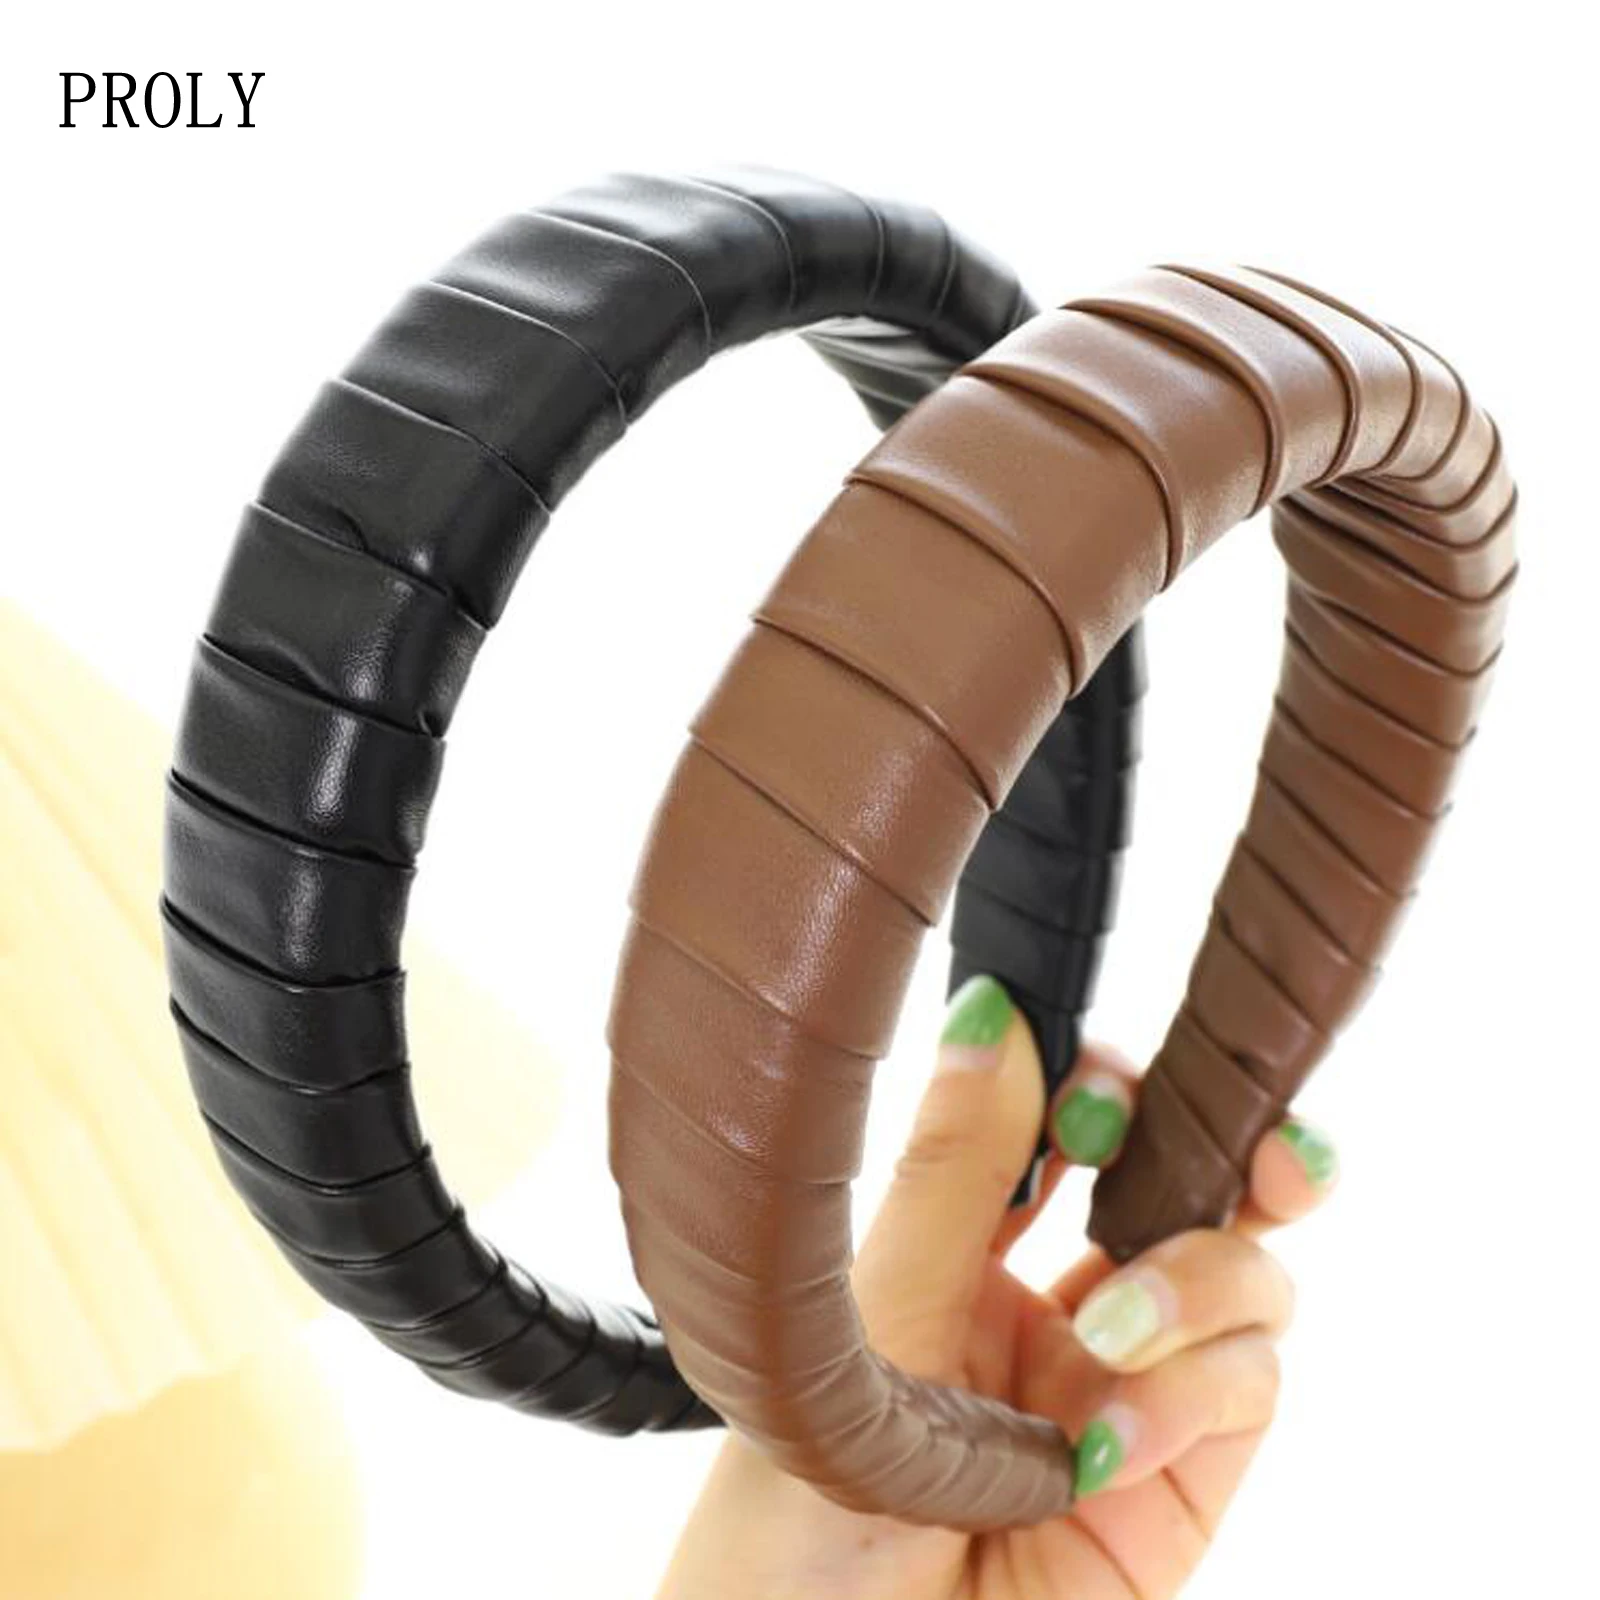 

PROLY New Fashion Women's Headband Thickened Sponge Hairband Wide Side Multi-layer Wound Headwear Casual Hair Accessories